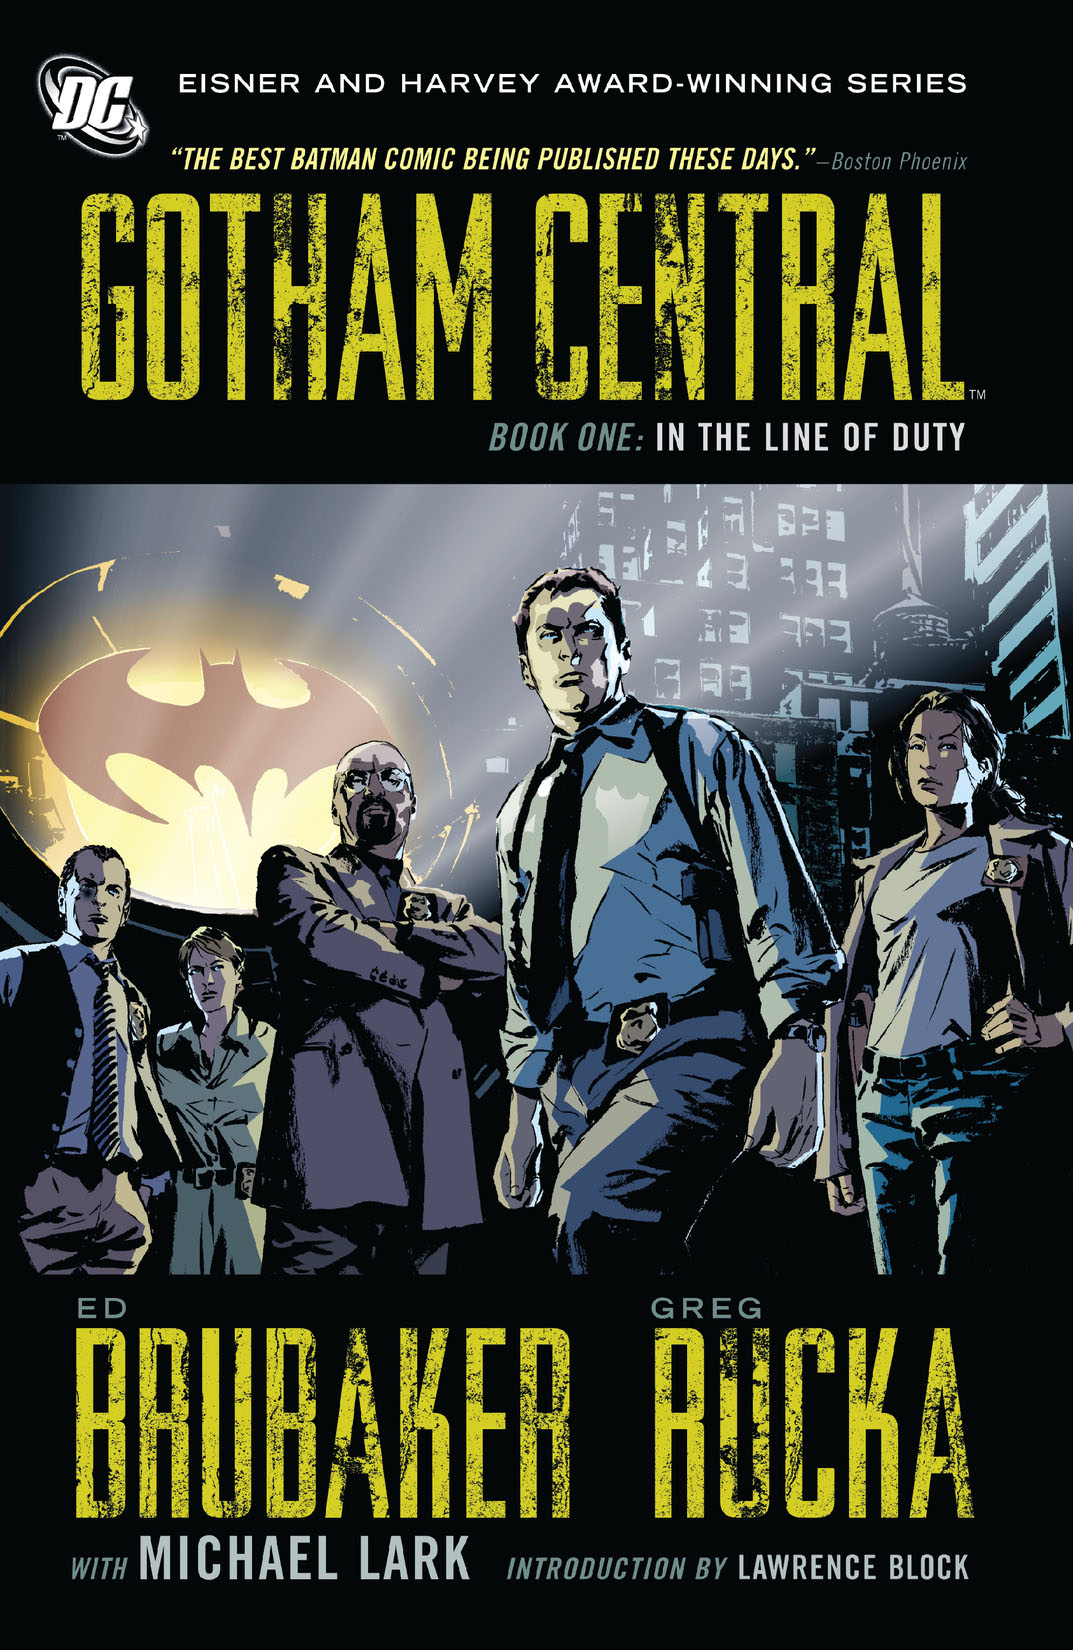 Gotham Central Book One: In The Line of Duty preview images